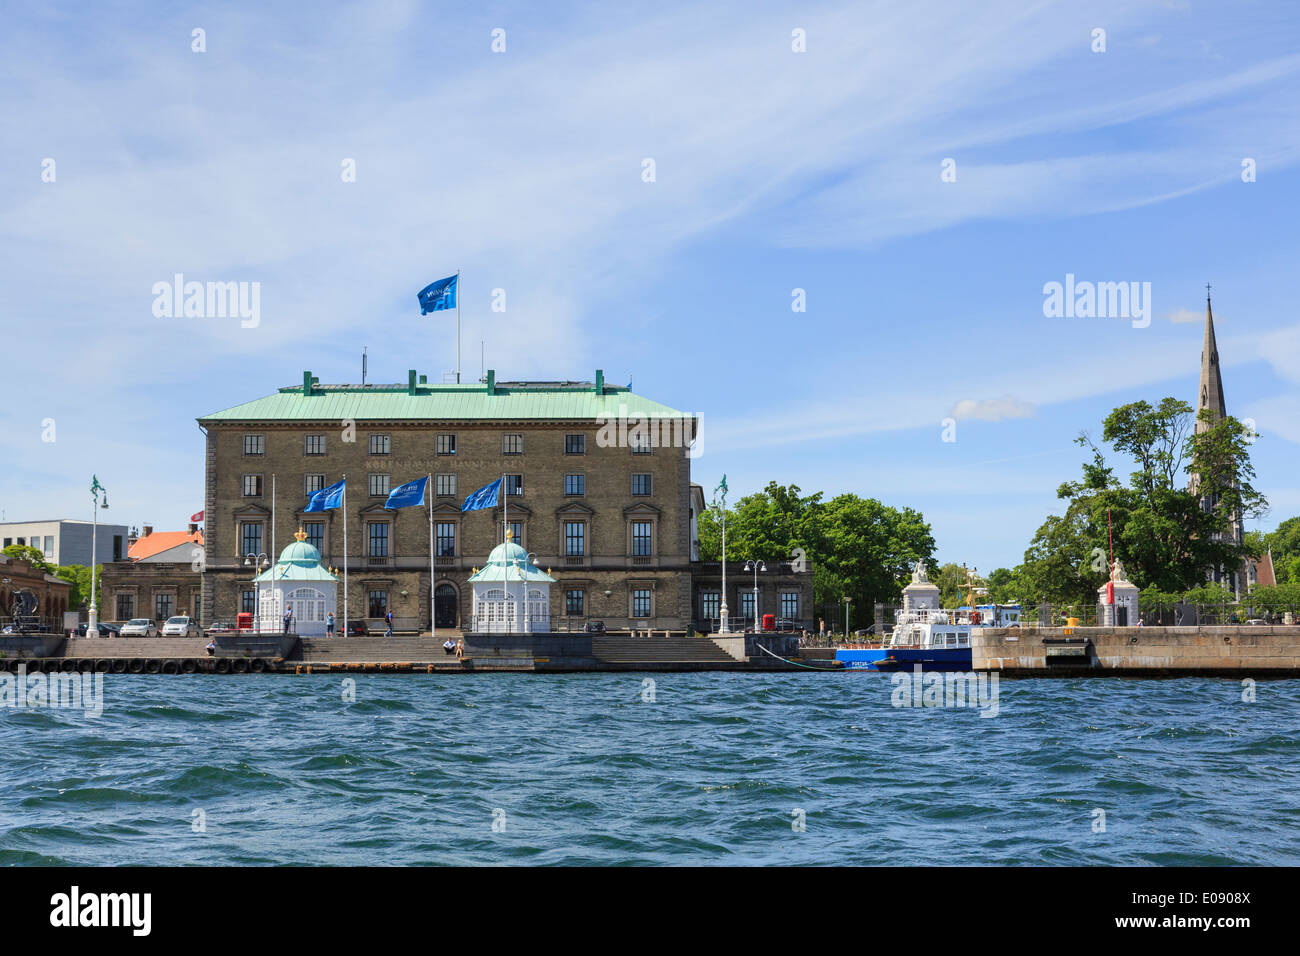 Royal pavilions and old northern custom house Nordre Tolbod headquarters of City and Port company on harbour Copenhagen Denmark Stock Photo